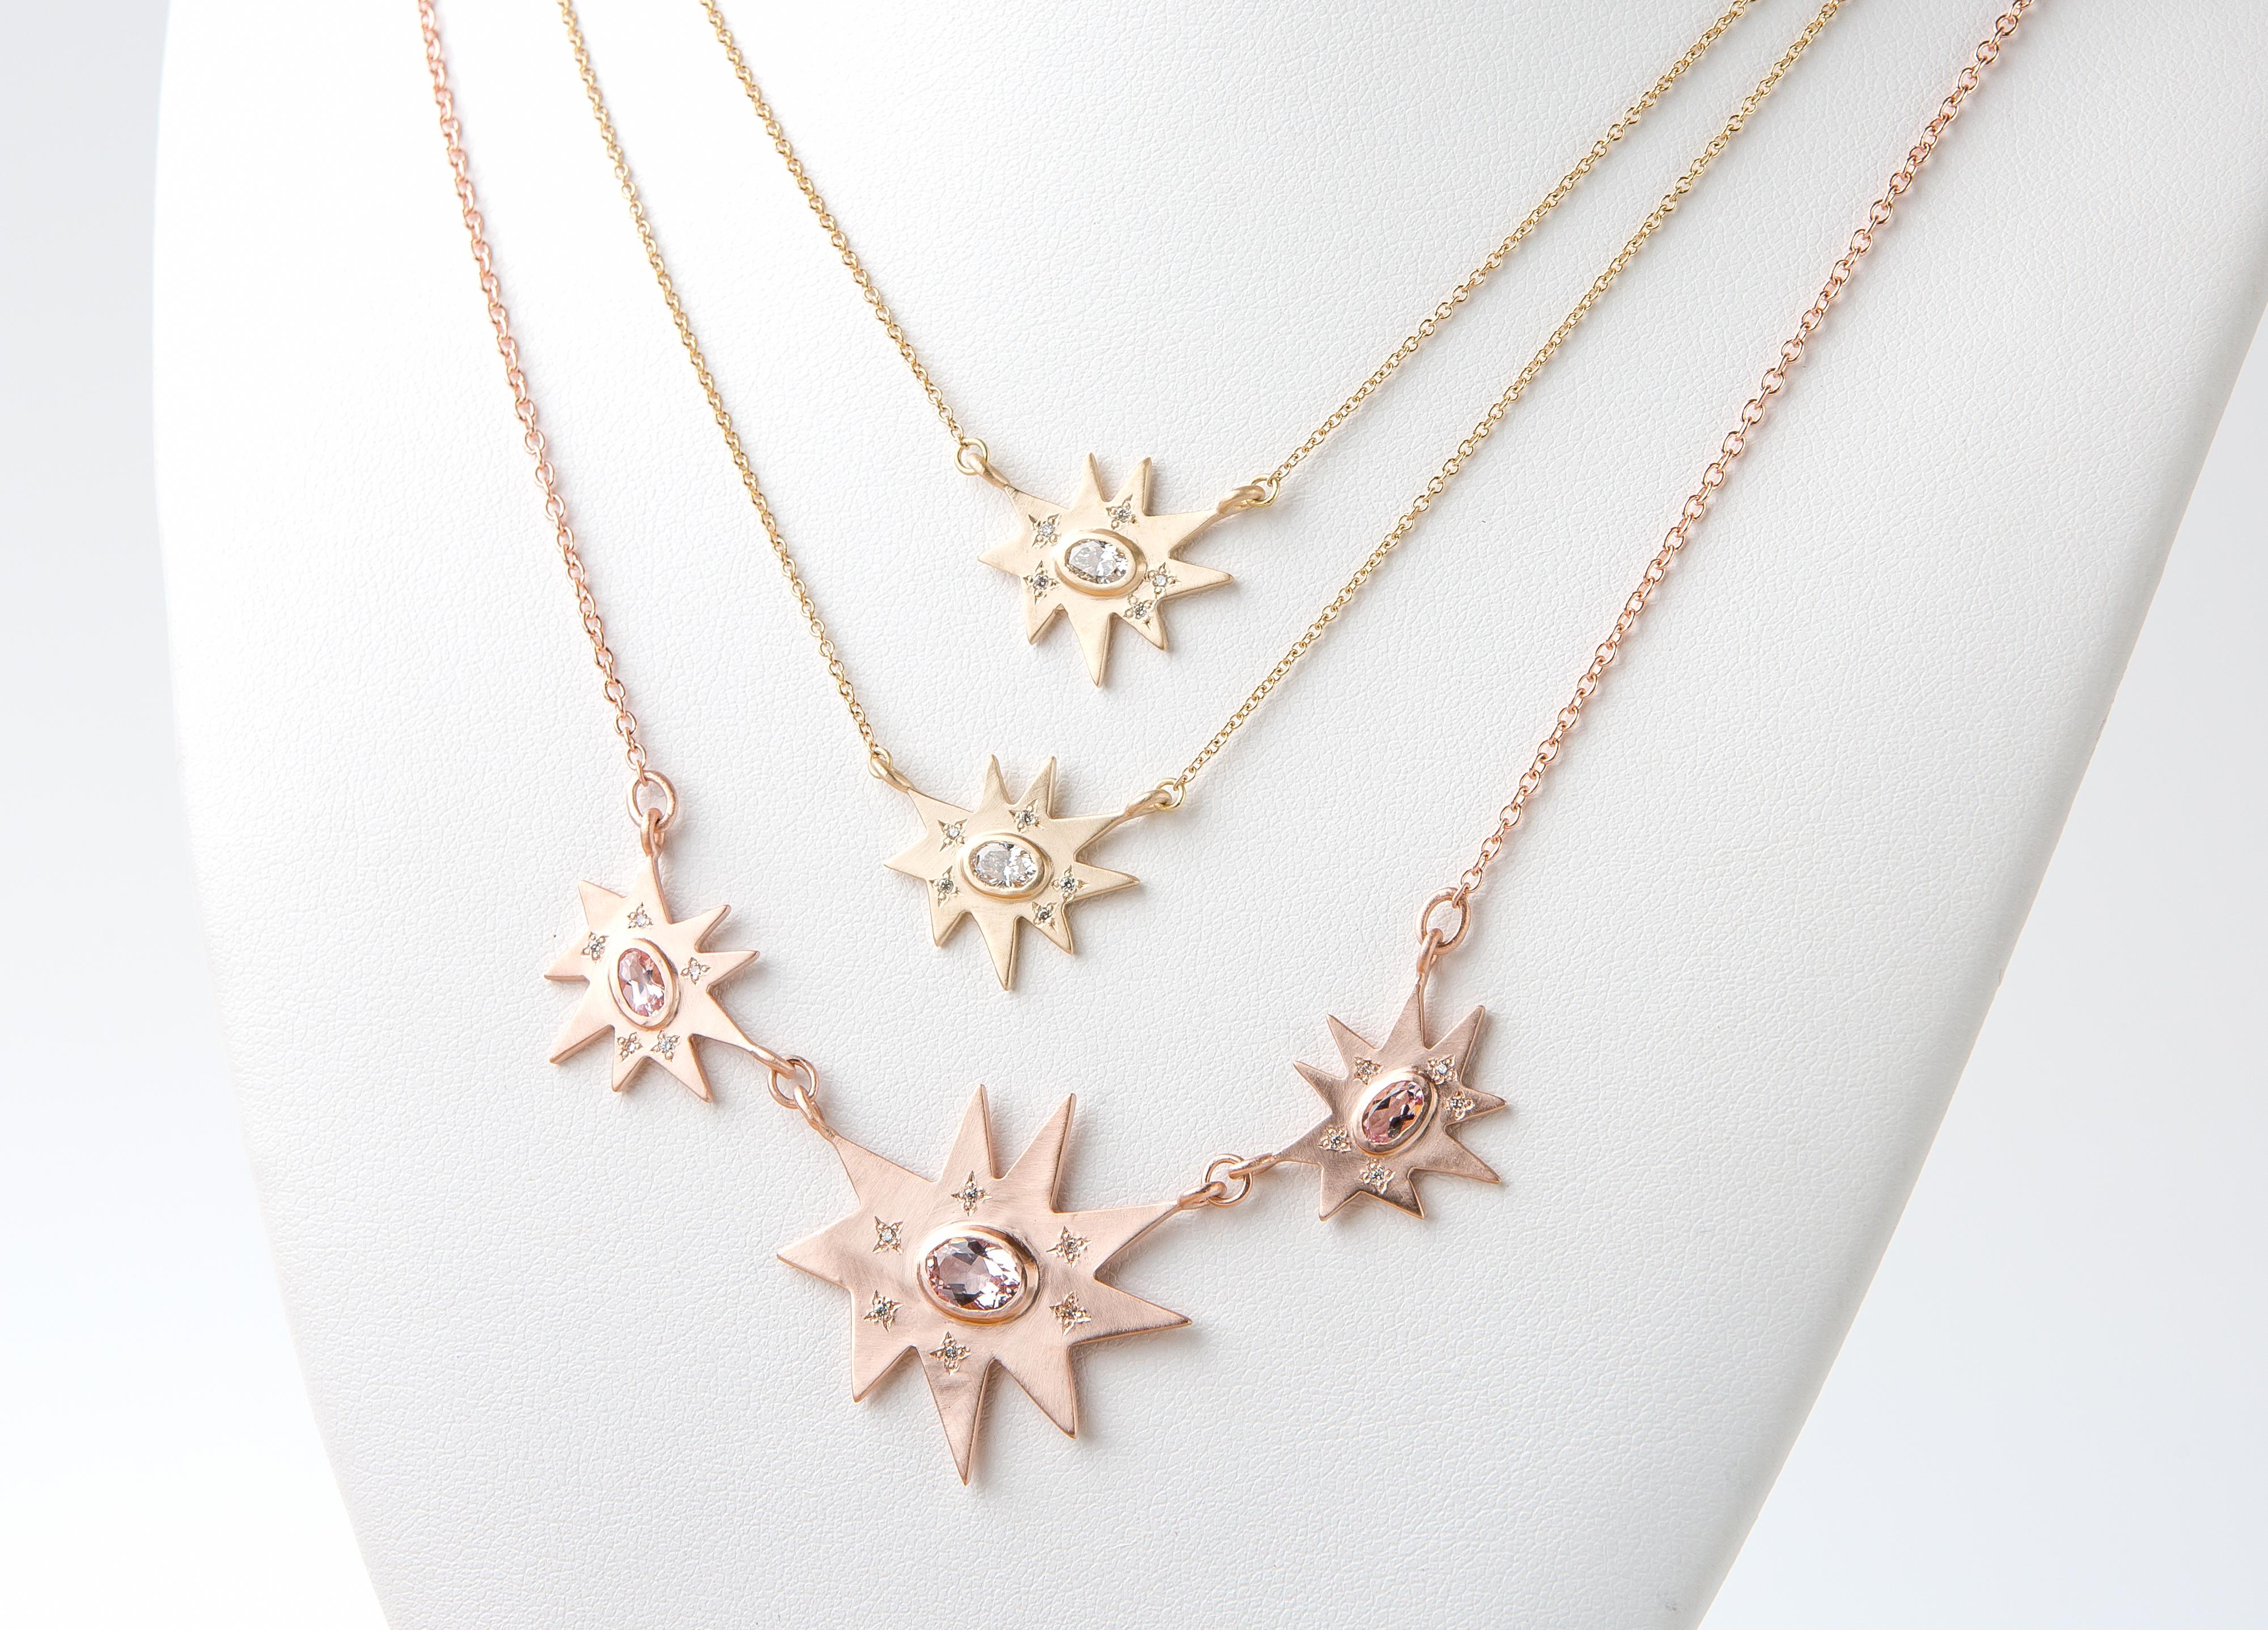 Stunning times three. Our Piccolo Grand Stella Necklace in warm rose gold features sparkly morganite in our center organic shape Stella star and accenting Stellina stars. All dusted with diamonds and hanging on a substantial chain, this warm pink